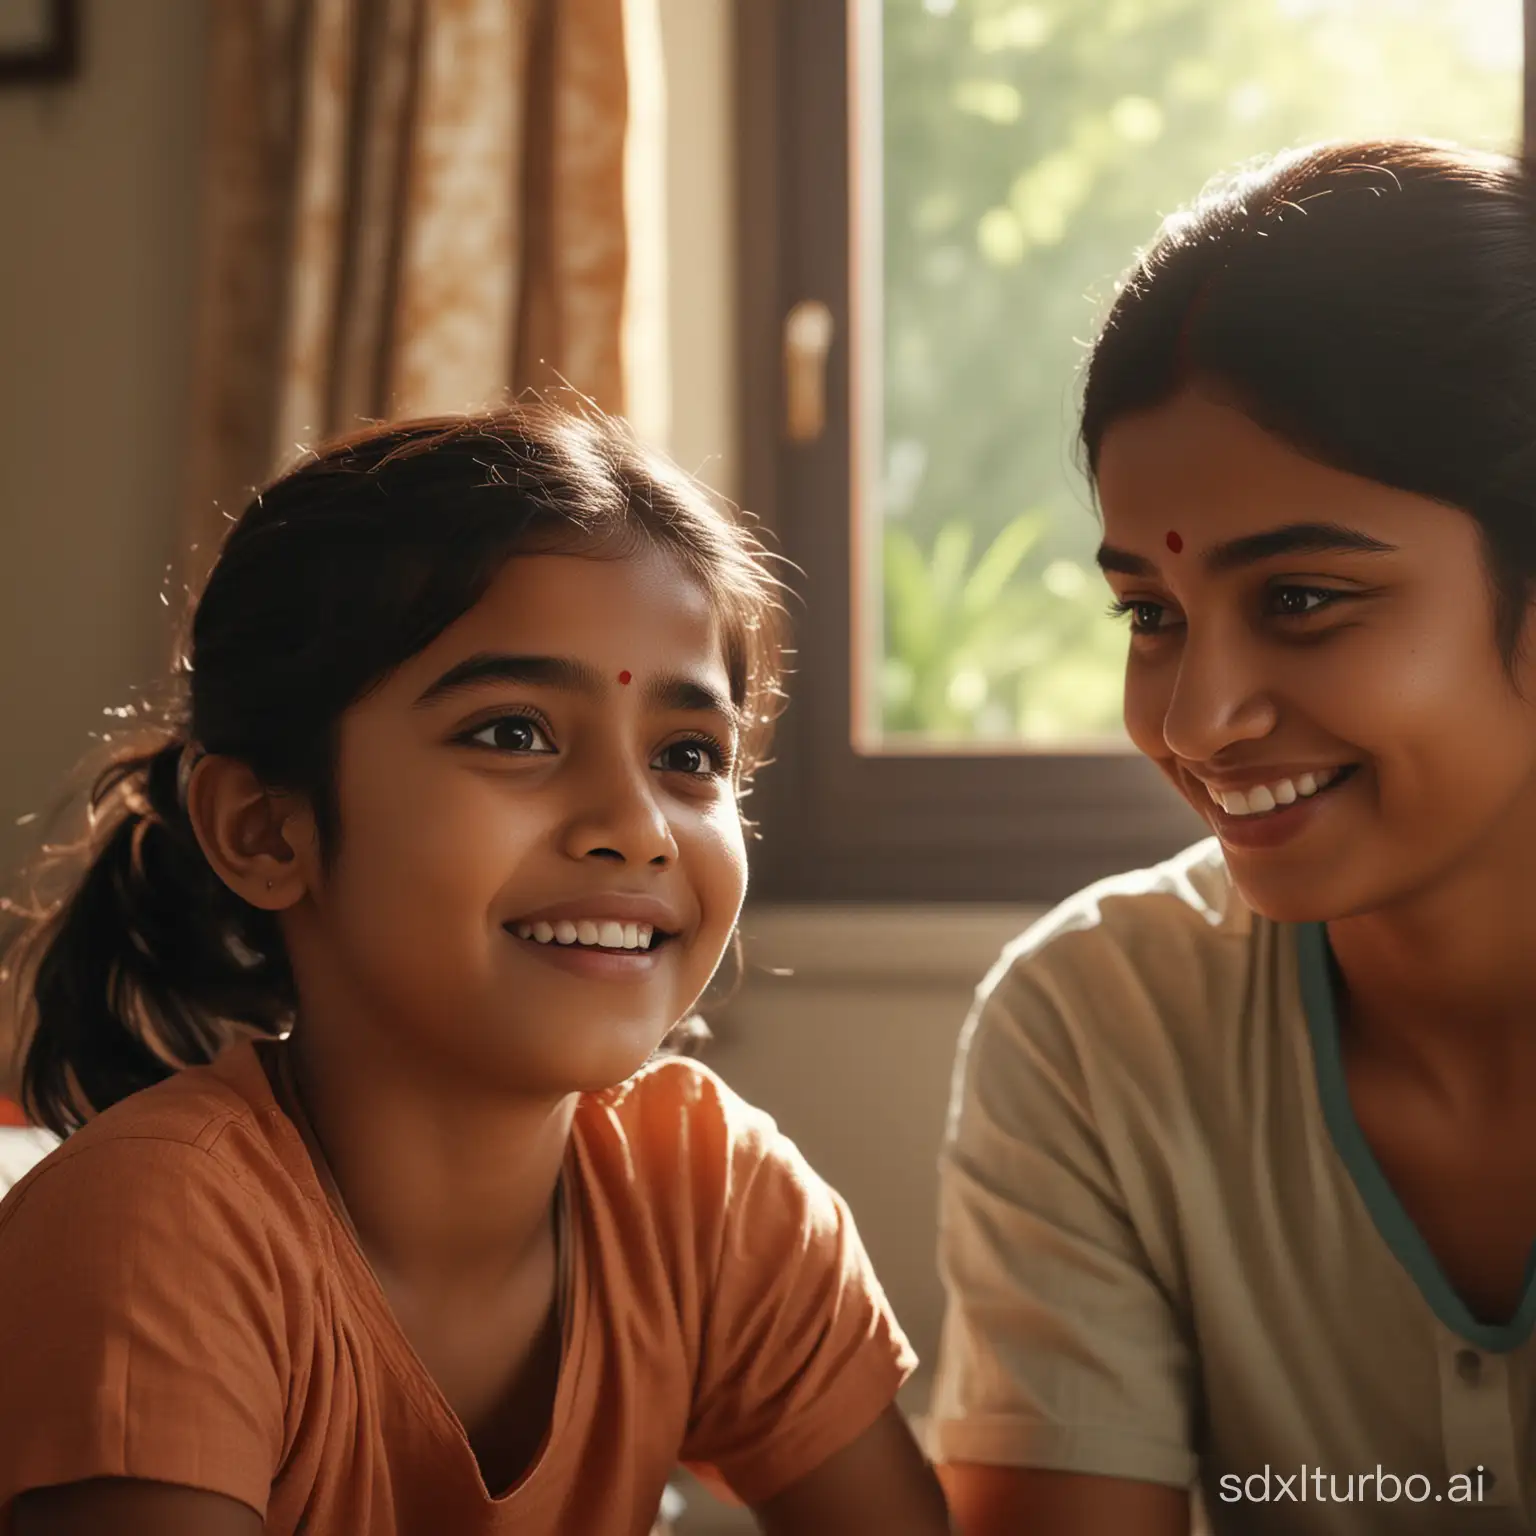 /imagine prompt: realistic, personality: a south indian  little girl Lily wakes up in the real world surrounded by her smiling parents, her face reflecting a mix of confusion and realization as she transitions back from her dream adventure. The warmth and love of her parents are evident in the gentle morning light illuminating the scene.unreal engine, hyper real --q 2 --v 5.2 --ar 16:9